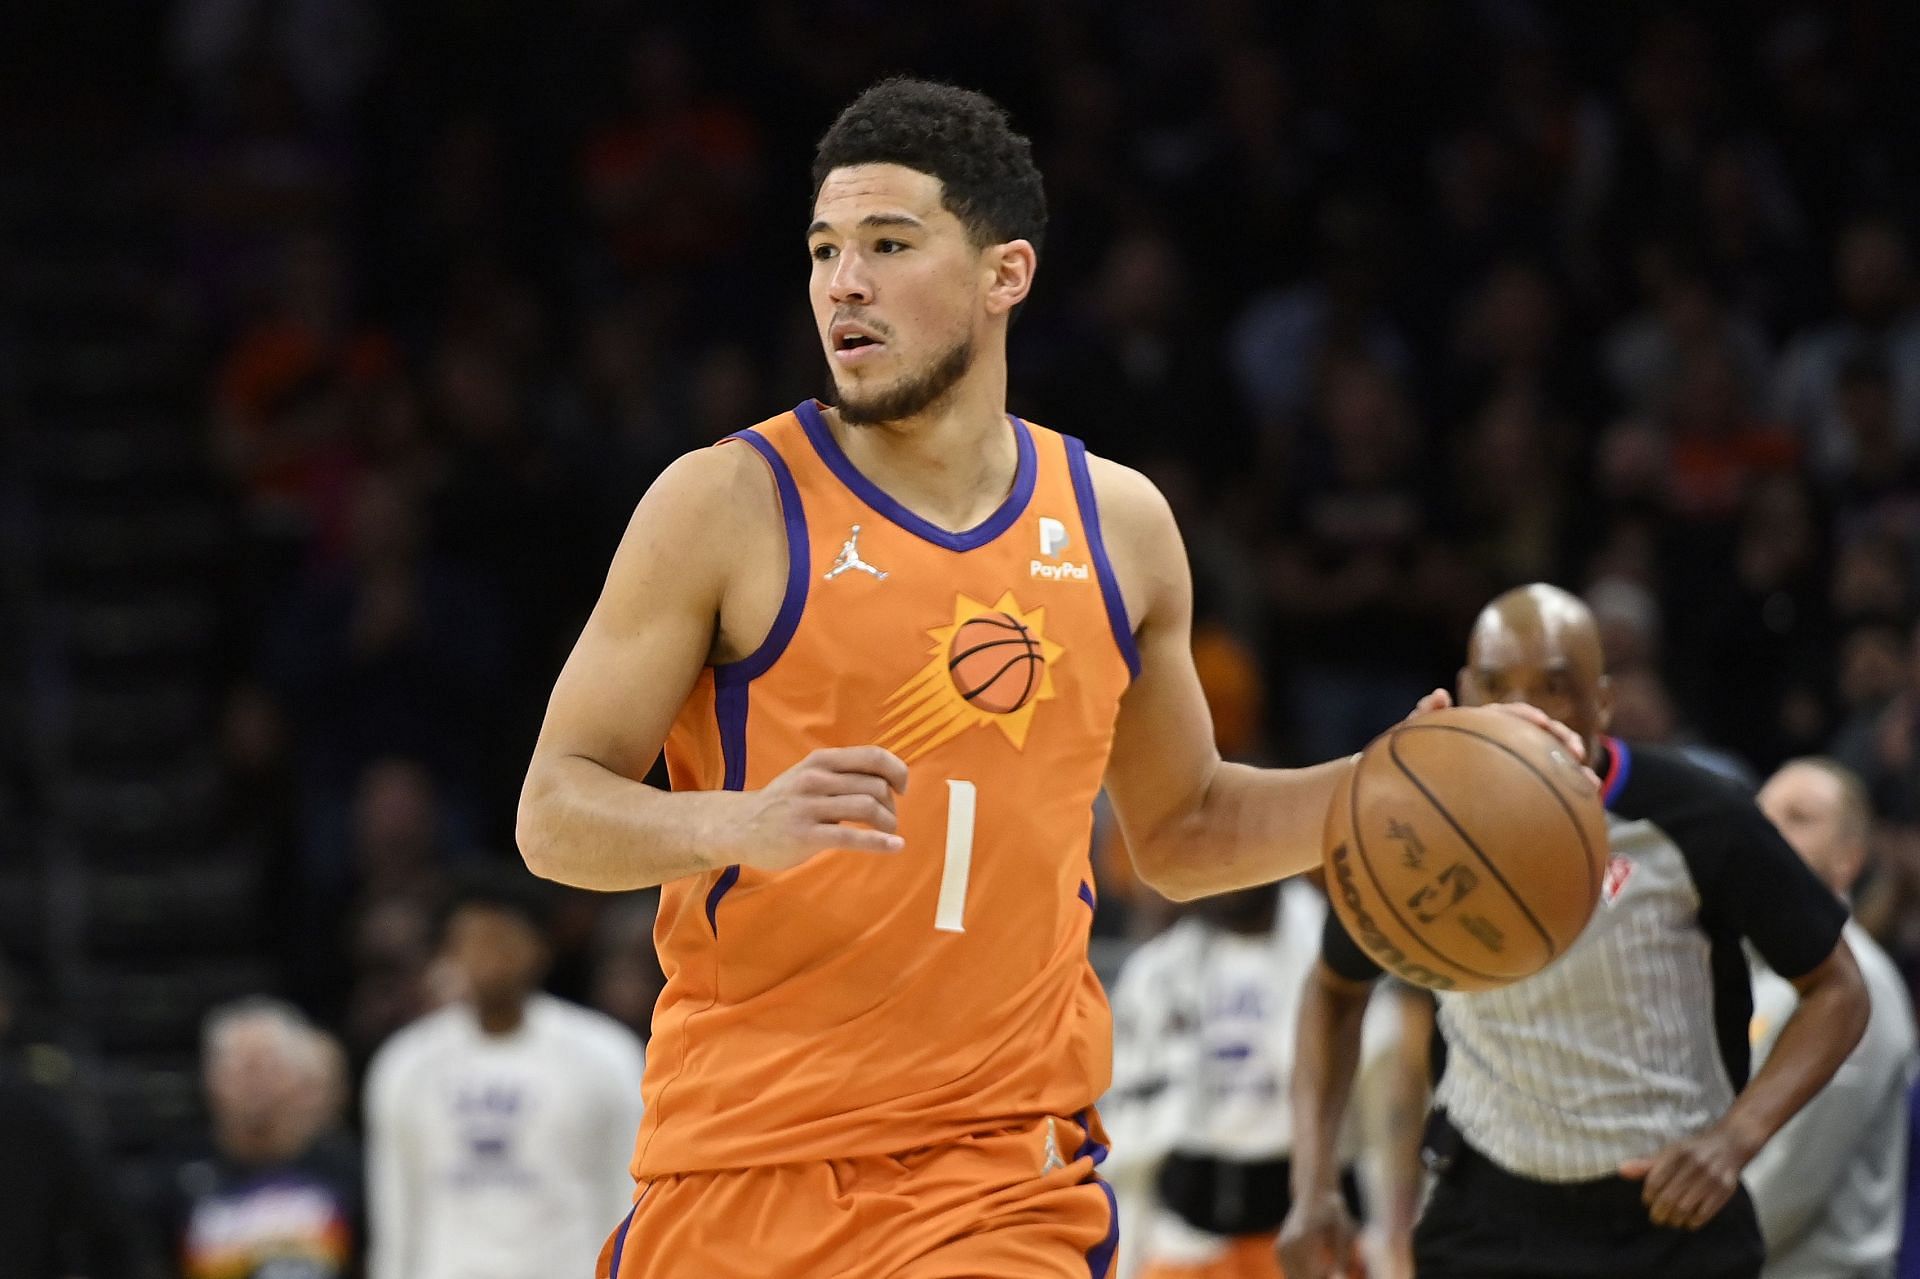 Devin Booker exchanged words with a fan during the game versus the Minnesota Timberwolves